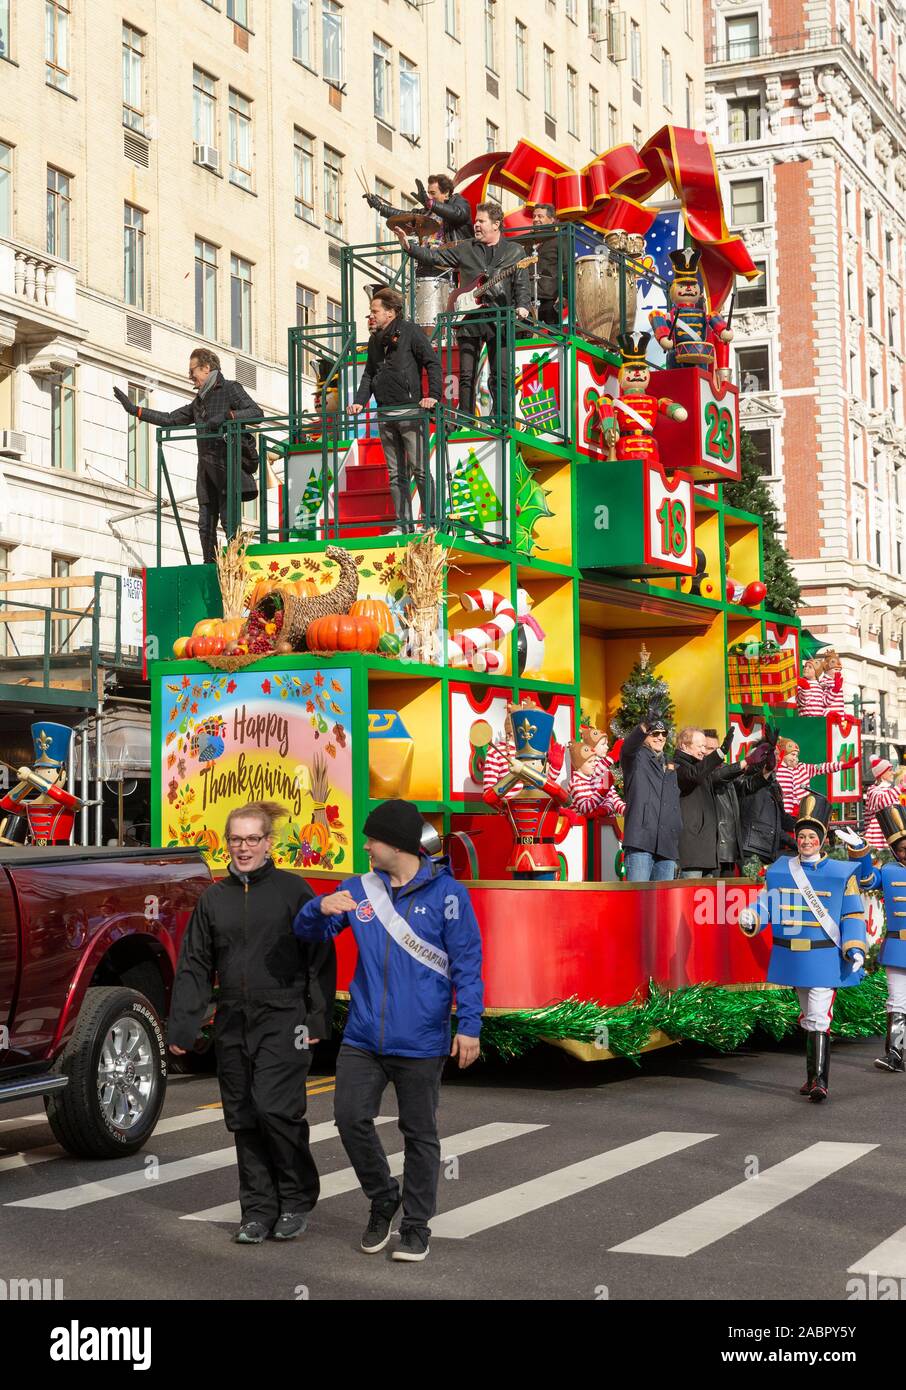 New York, NY - November 28, 2019: Chicago band rides float Heartwarming Holiday Countdown by Hallmark Channel at 93rd Annual Macy's Thanksgiving Day Parade alone Central Park West Stock Photo